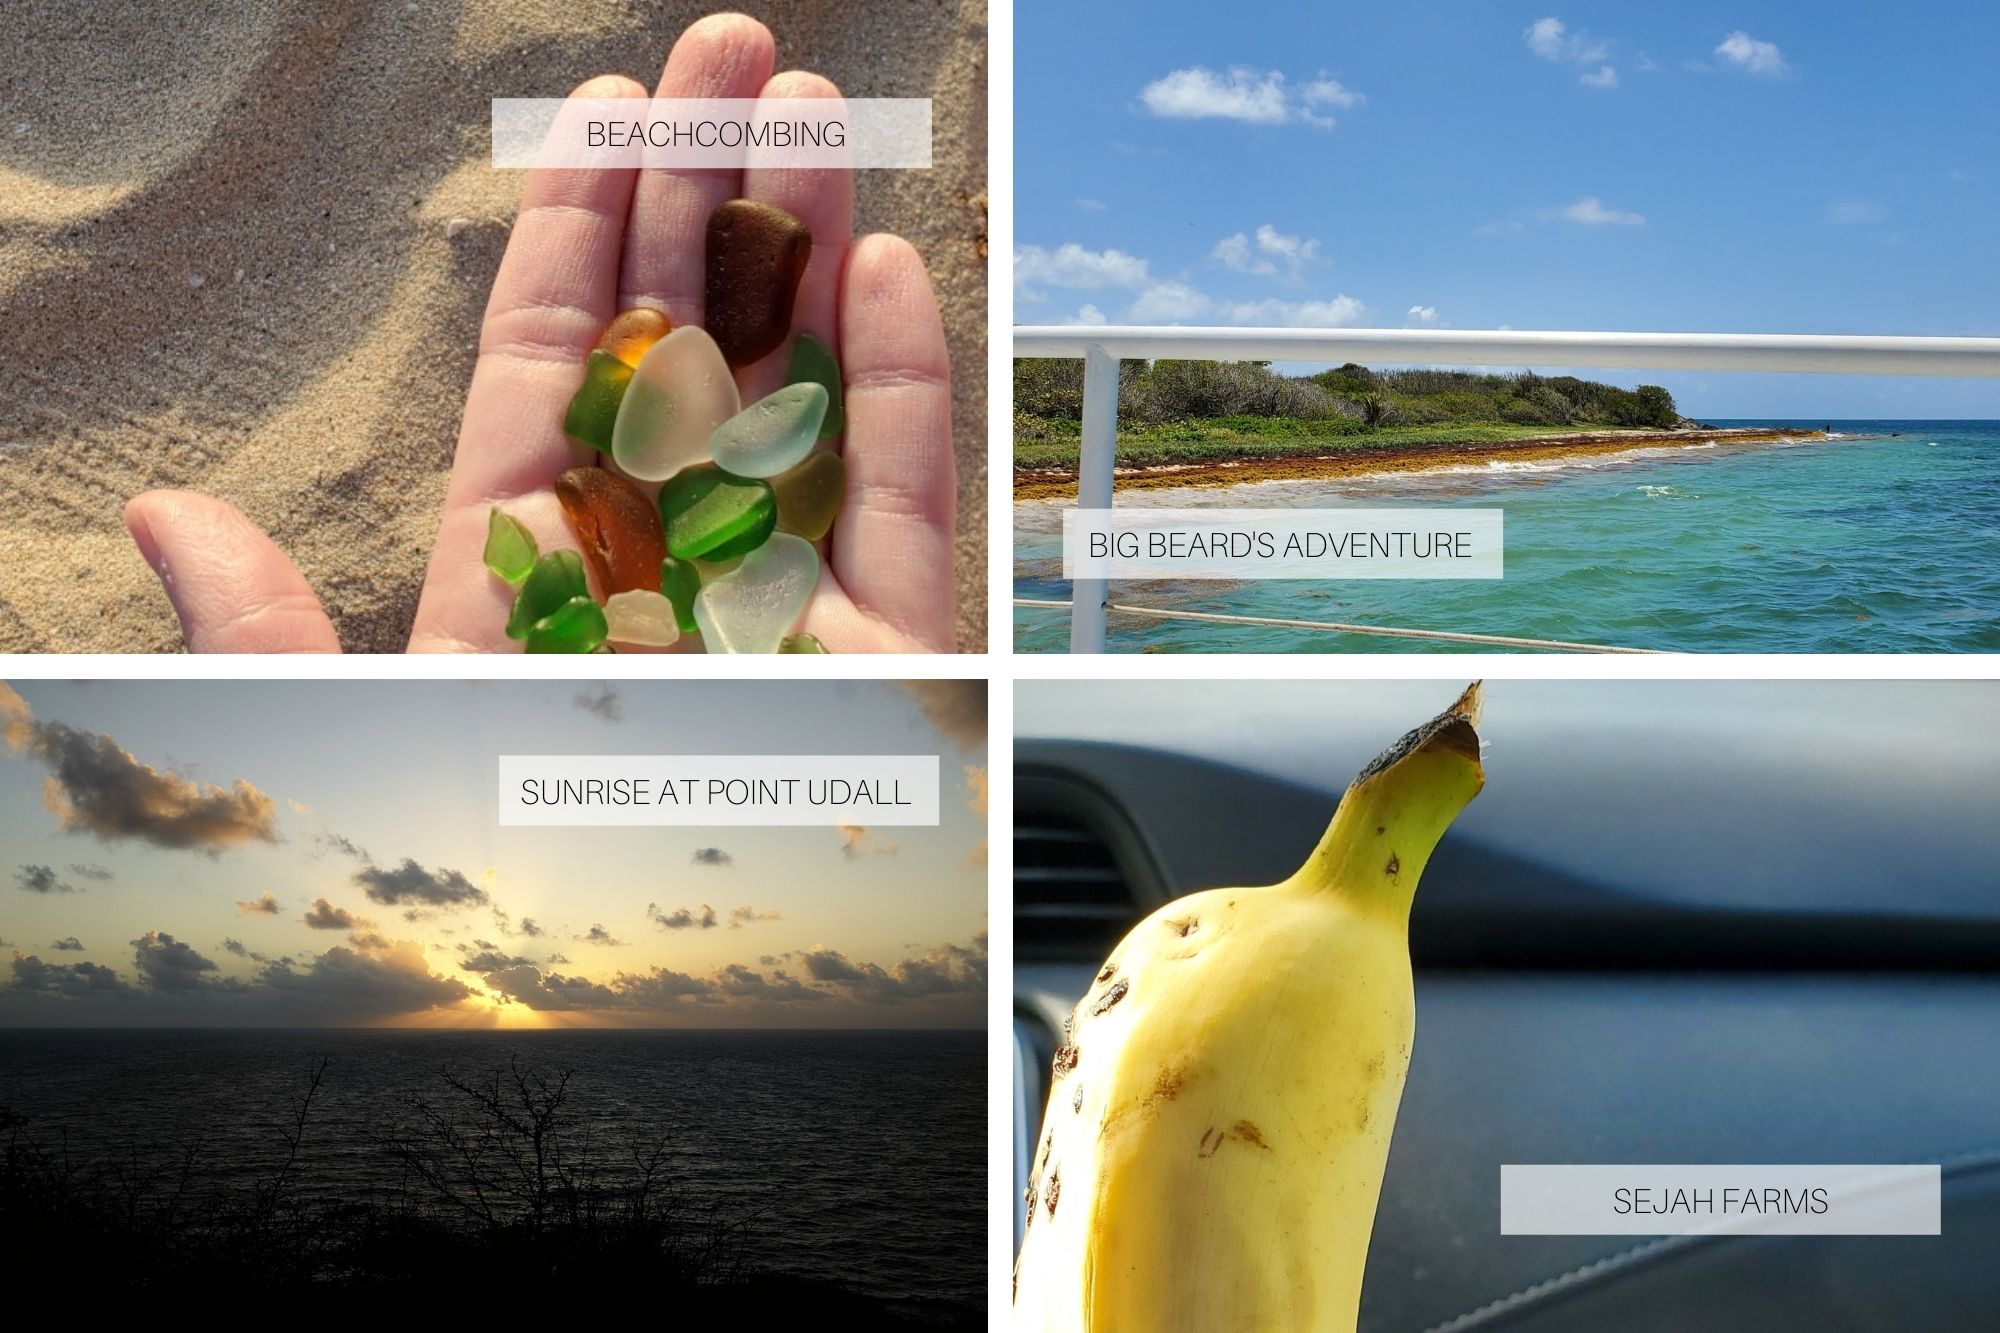 A collage of photos taken in St. Croix: sea glass, a tour boat, a sunrise, and a banana